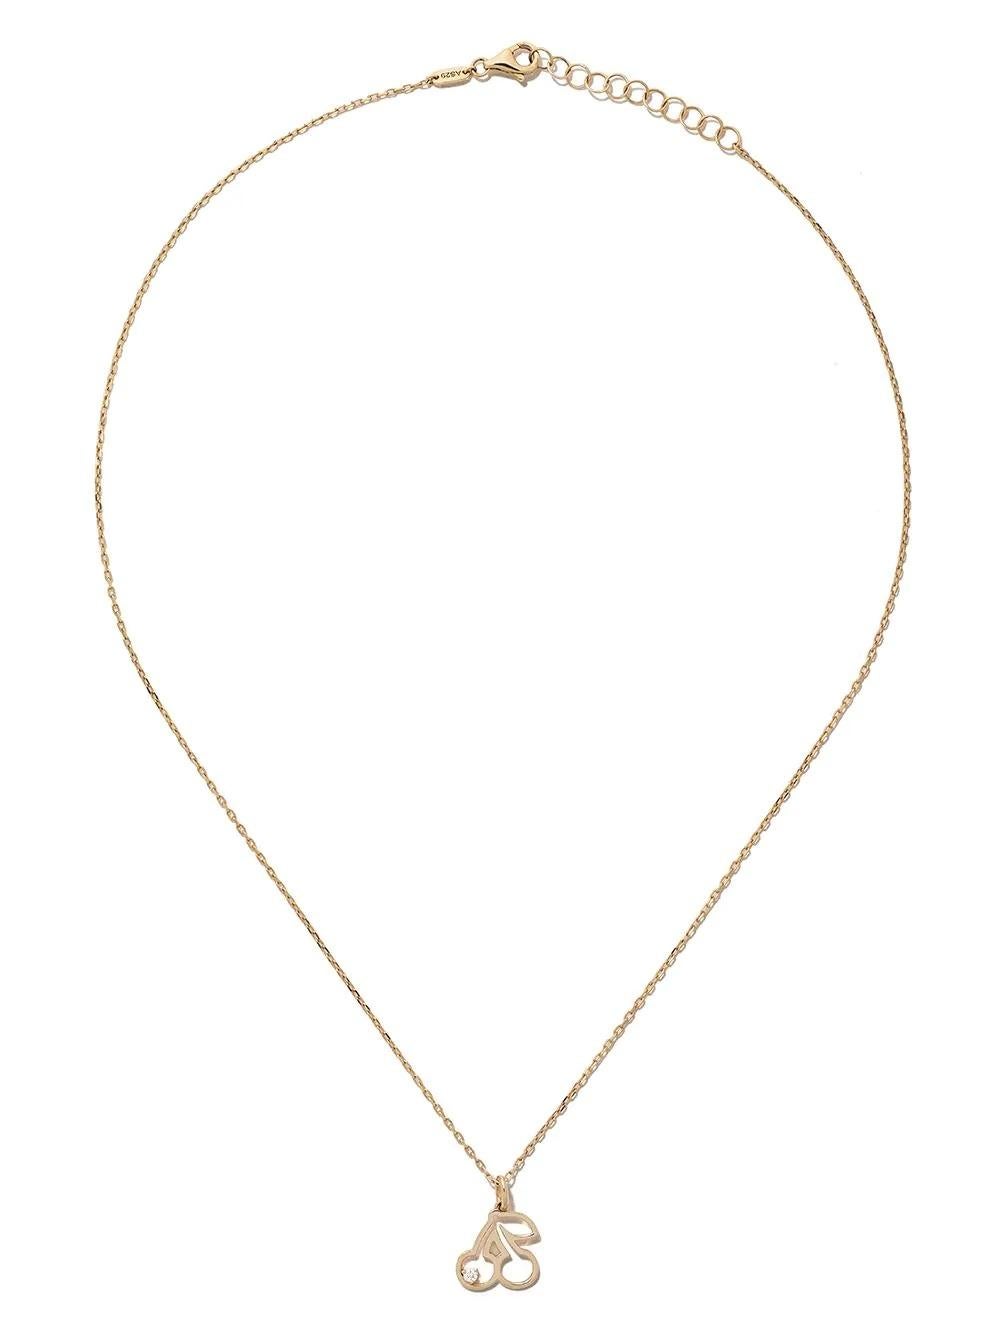 AS29
14kt yellow gold diamond Cherry necklace
Looking for the cherry on top for your looks? This 14kt yellow gold and diamond Cherry necklace from AS29 seems the perfect option. Literally. 

Highlights
yellow gold 
14kt yellow gold/diamond
lobster